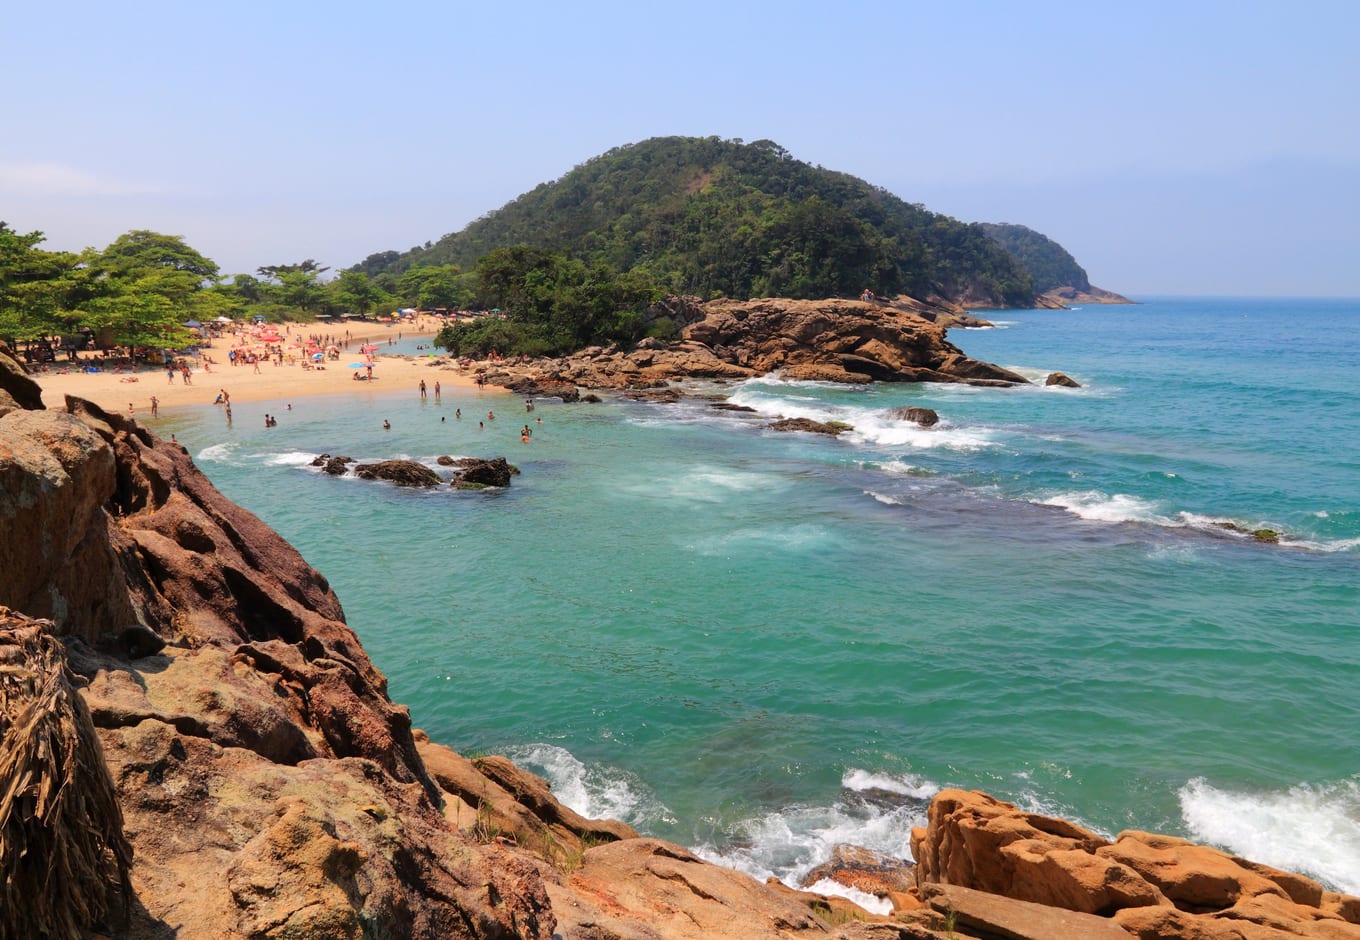 The blue-green ocean surrounded by rocks and a forested hill on Trindade Beach, Brasil.